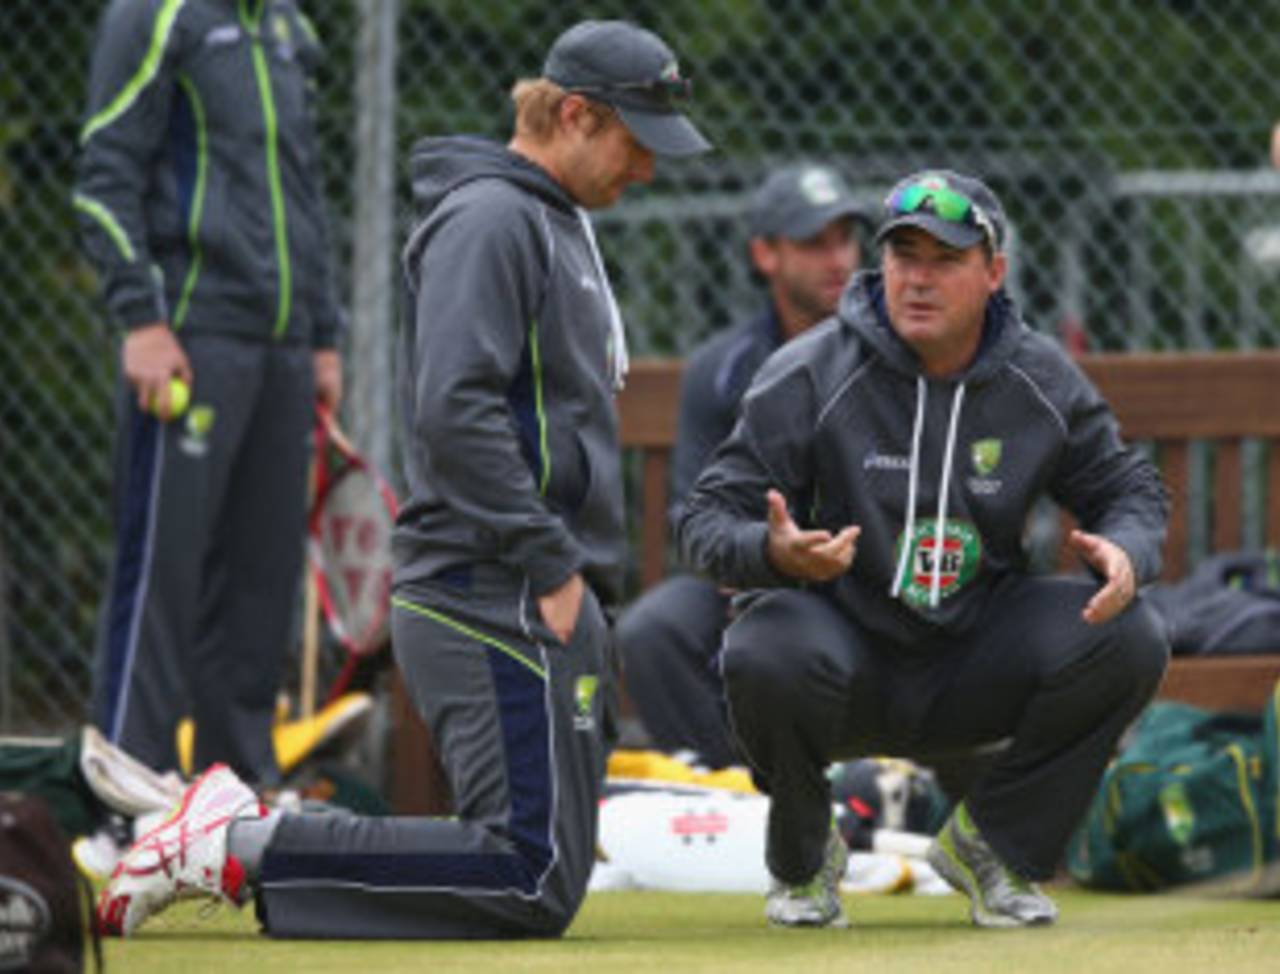 Mickey Arthur, Australia's coach, has told Australia to be street smart to survive the English media and ECB&nbsp;&nbsp;&bull;&nbsp;&nbsp;Getty Images